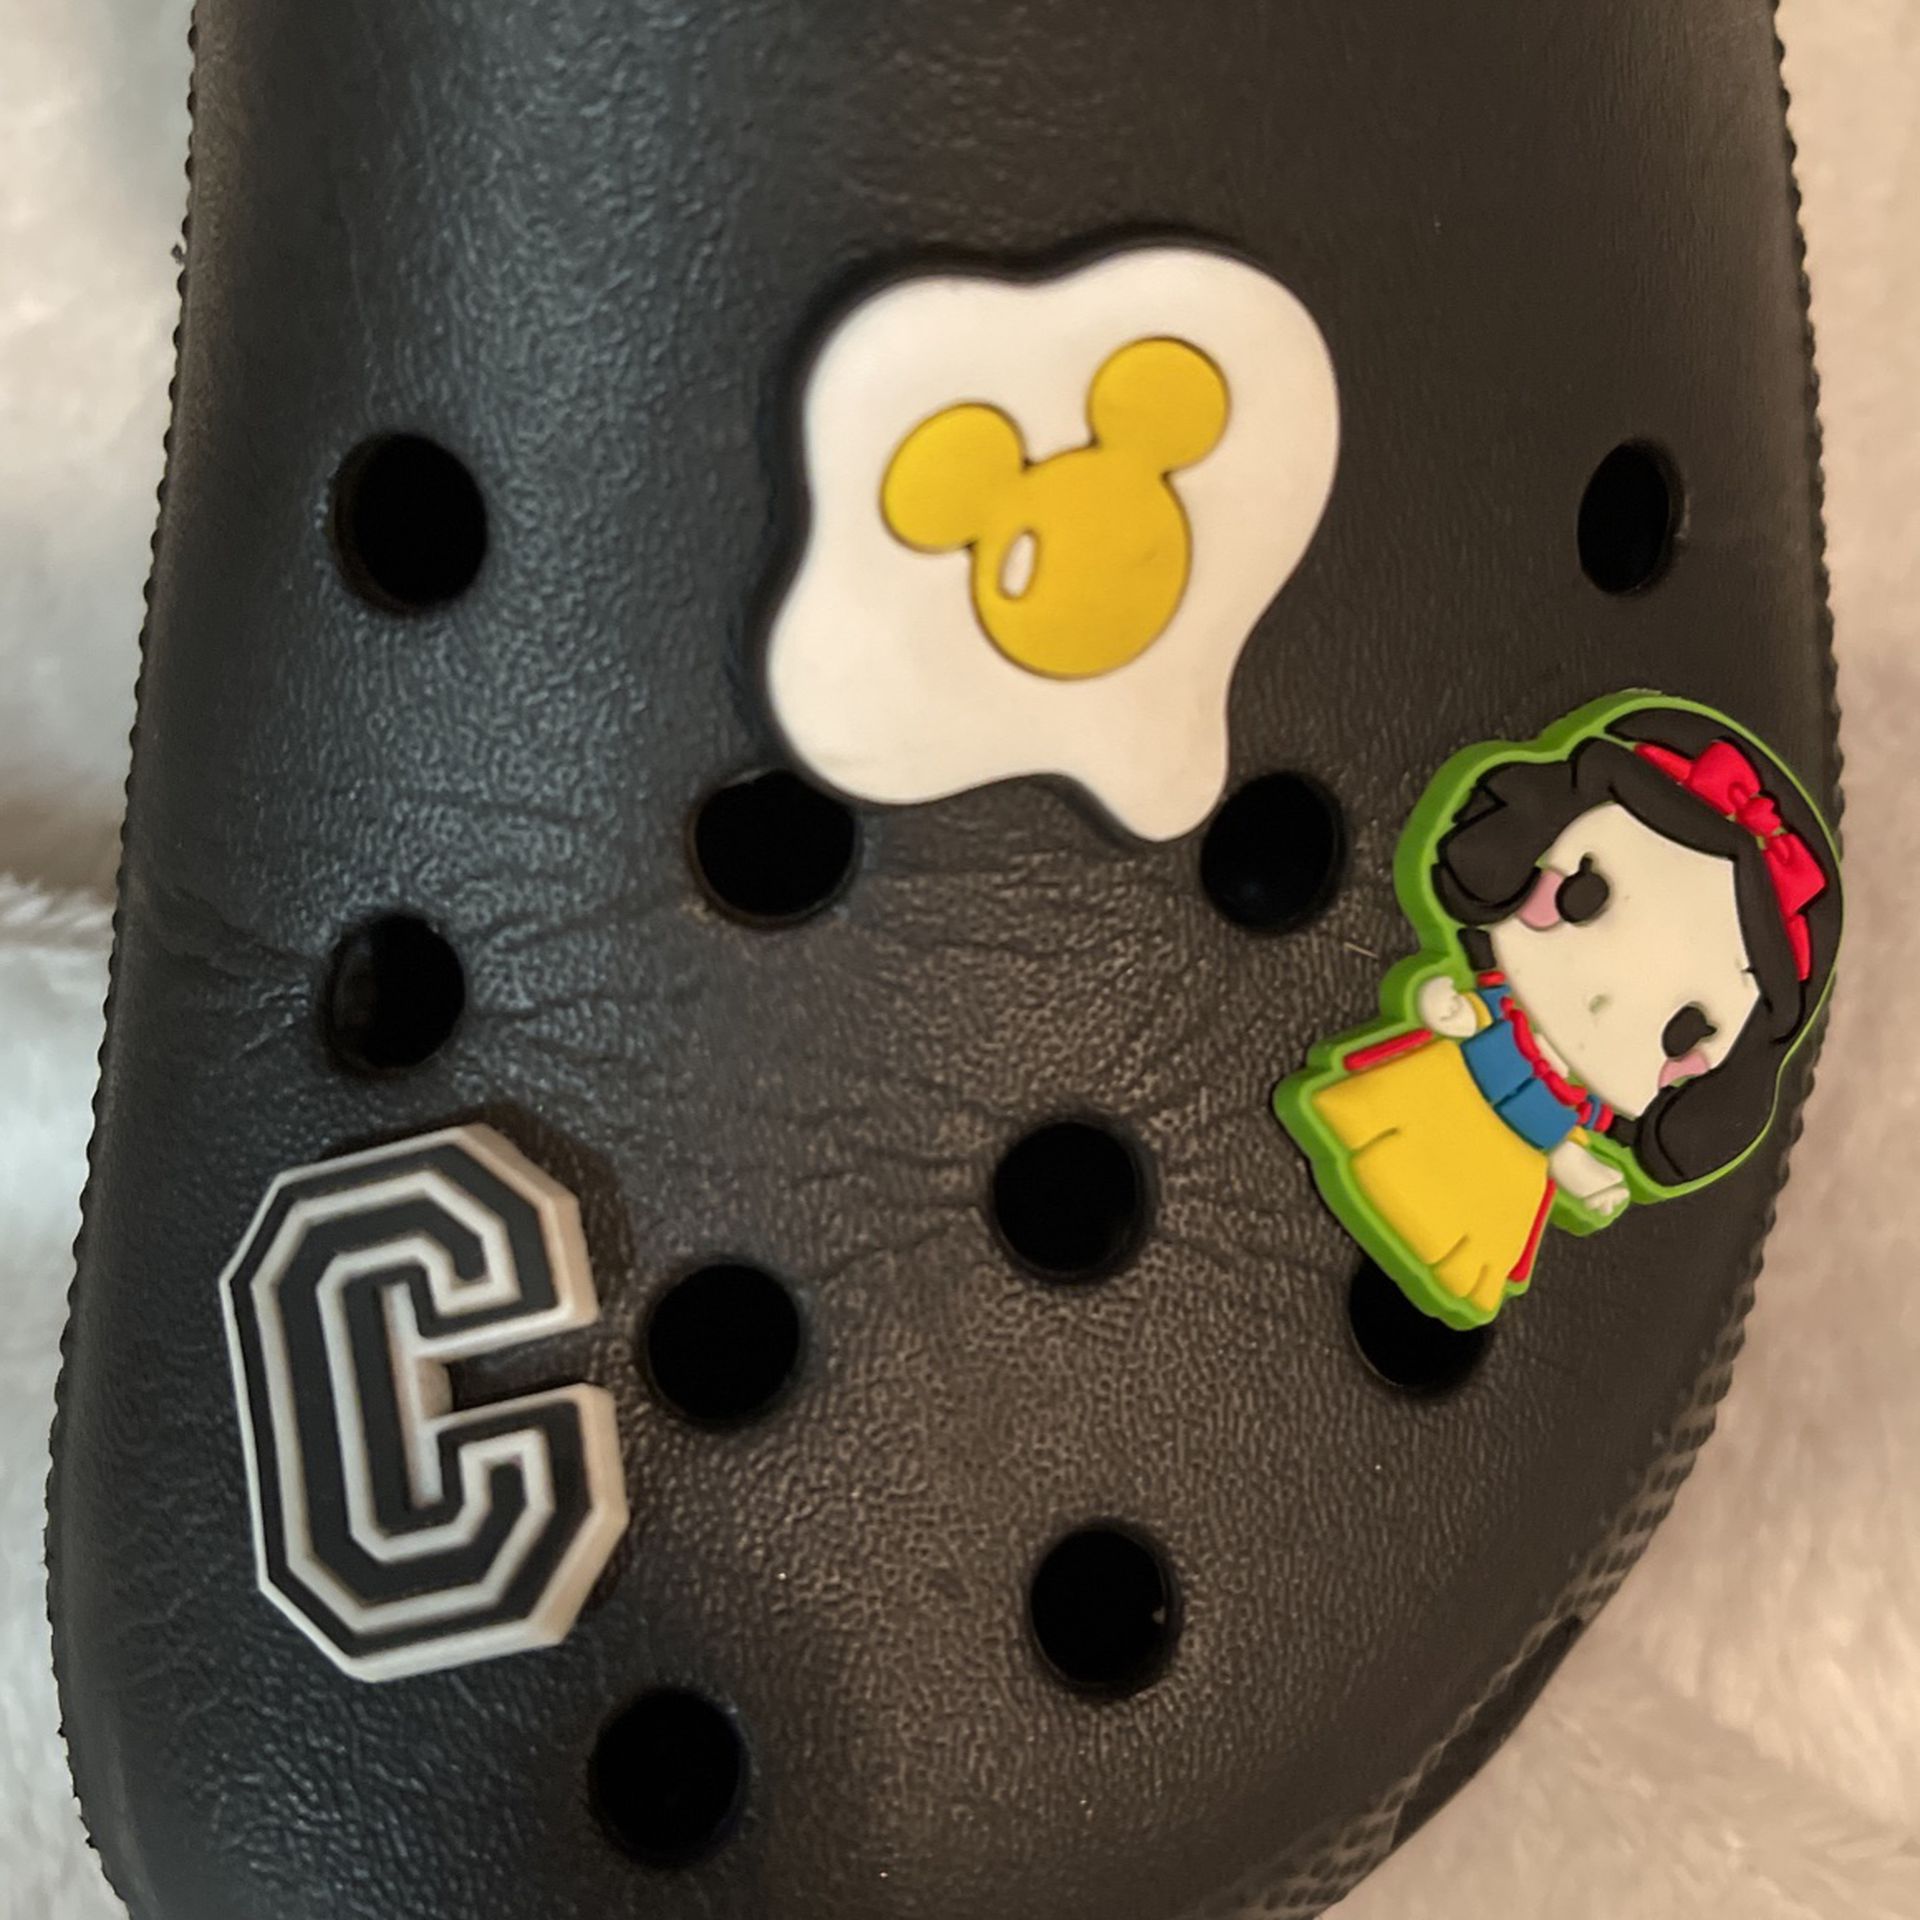 Crocs With Designer Charms Size 6 for Sale in Spring, TX - OfferUp